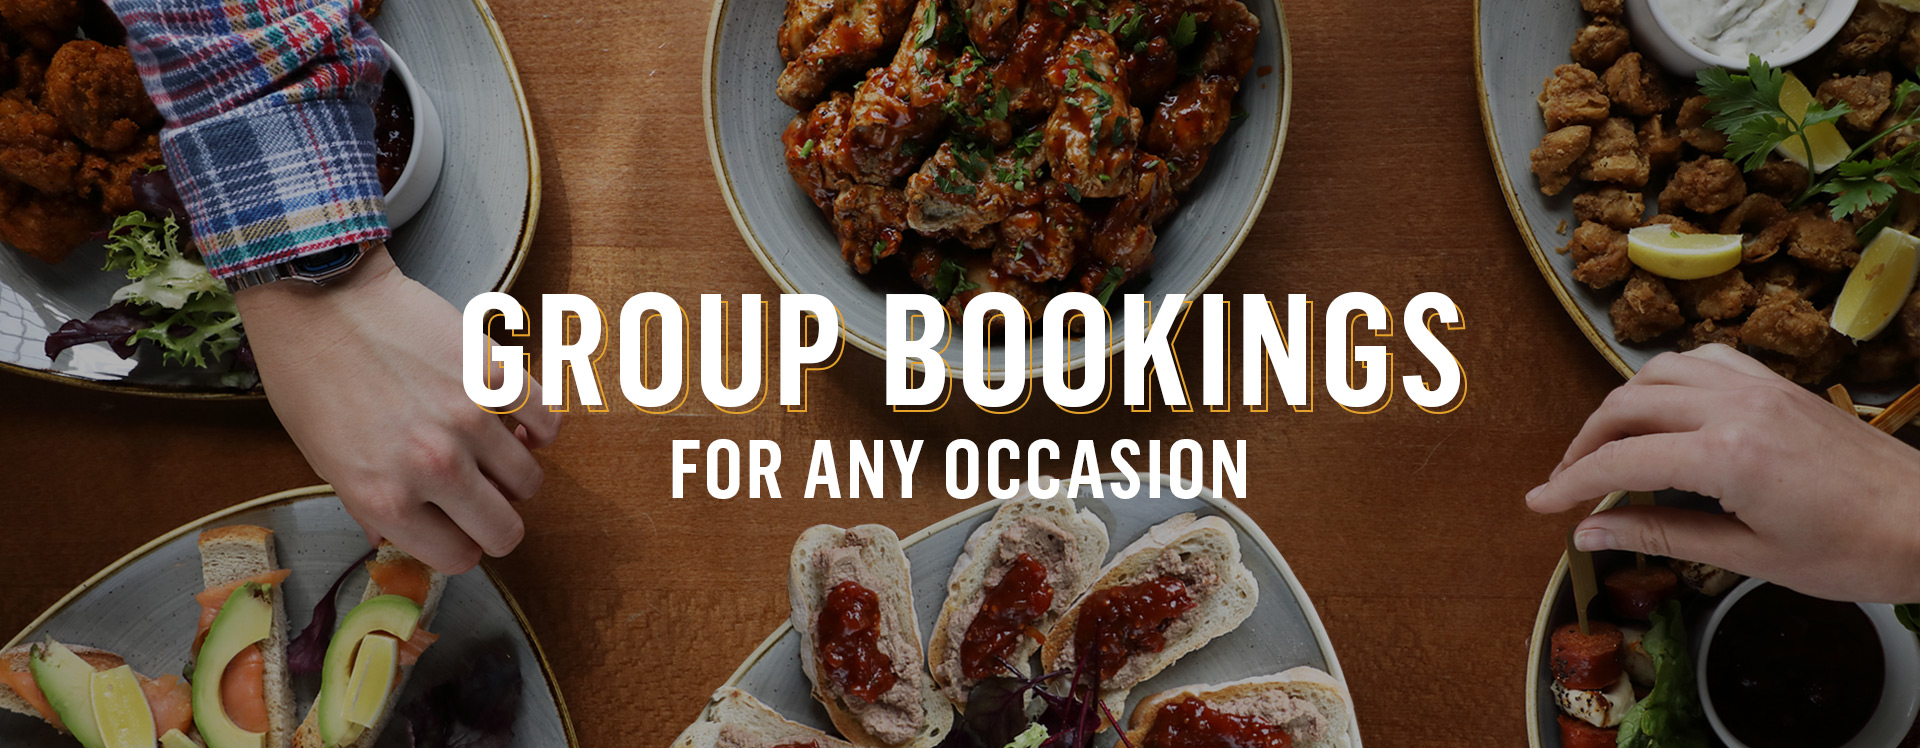 Group Bookings at The Sir Christopher Hatton